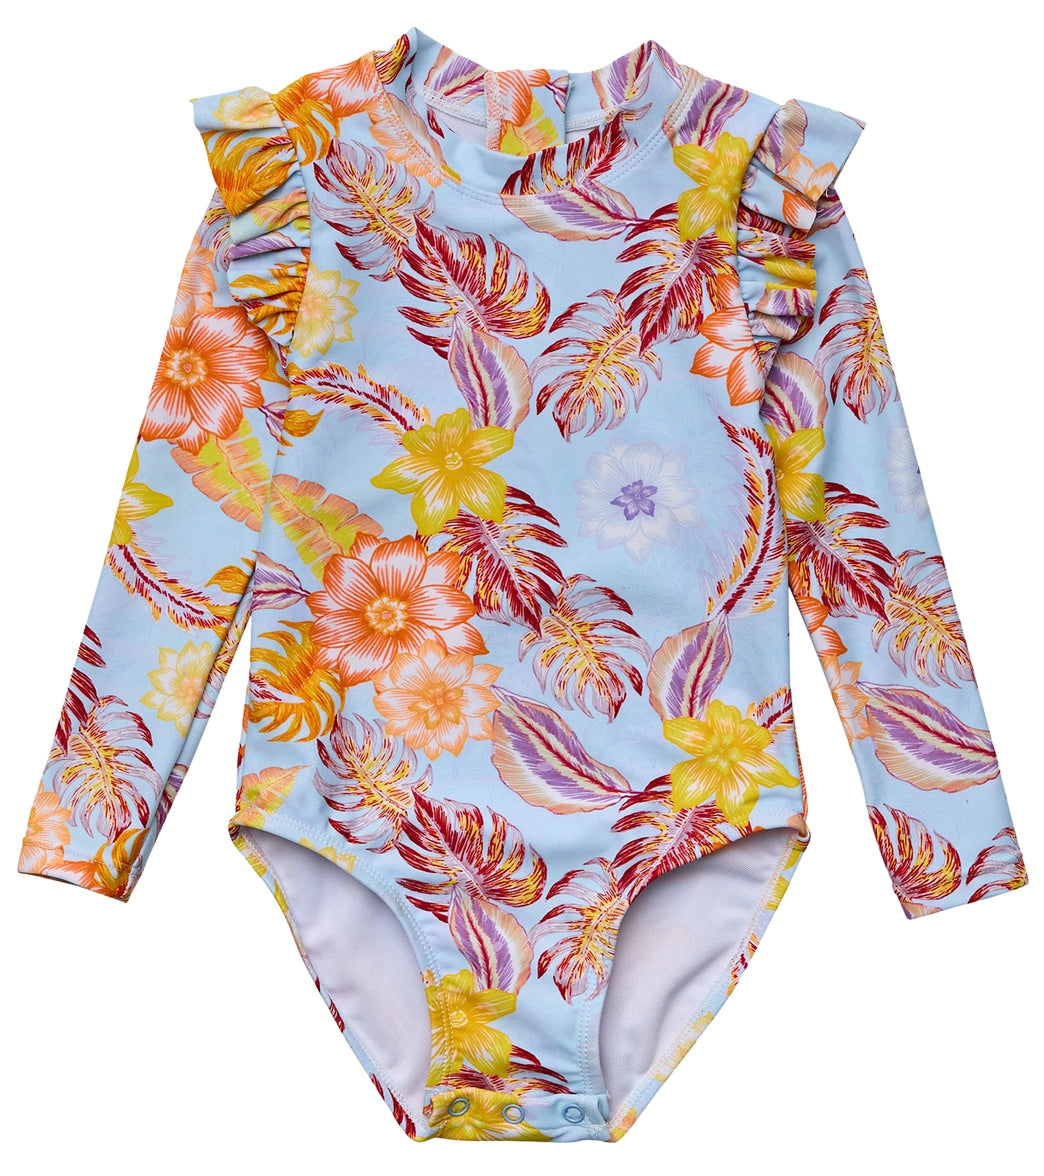 Snapper Rock Girls Boho Tropical Frill Long Sleeve One Piece Swimsuit (Baby, Toddler, Little Kid)